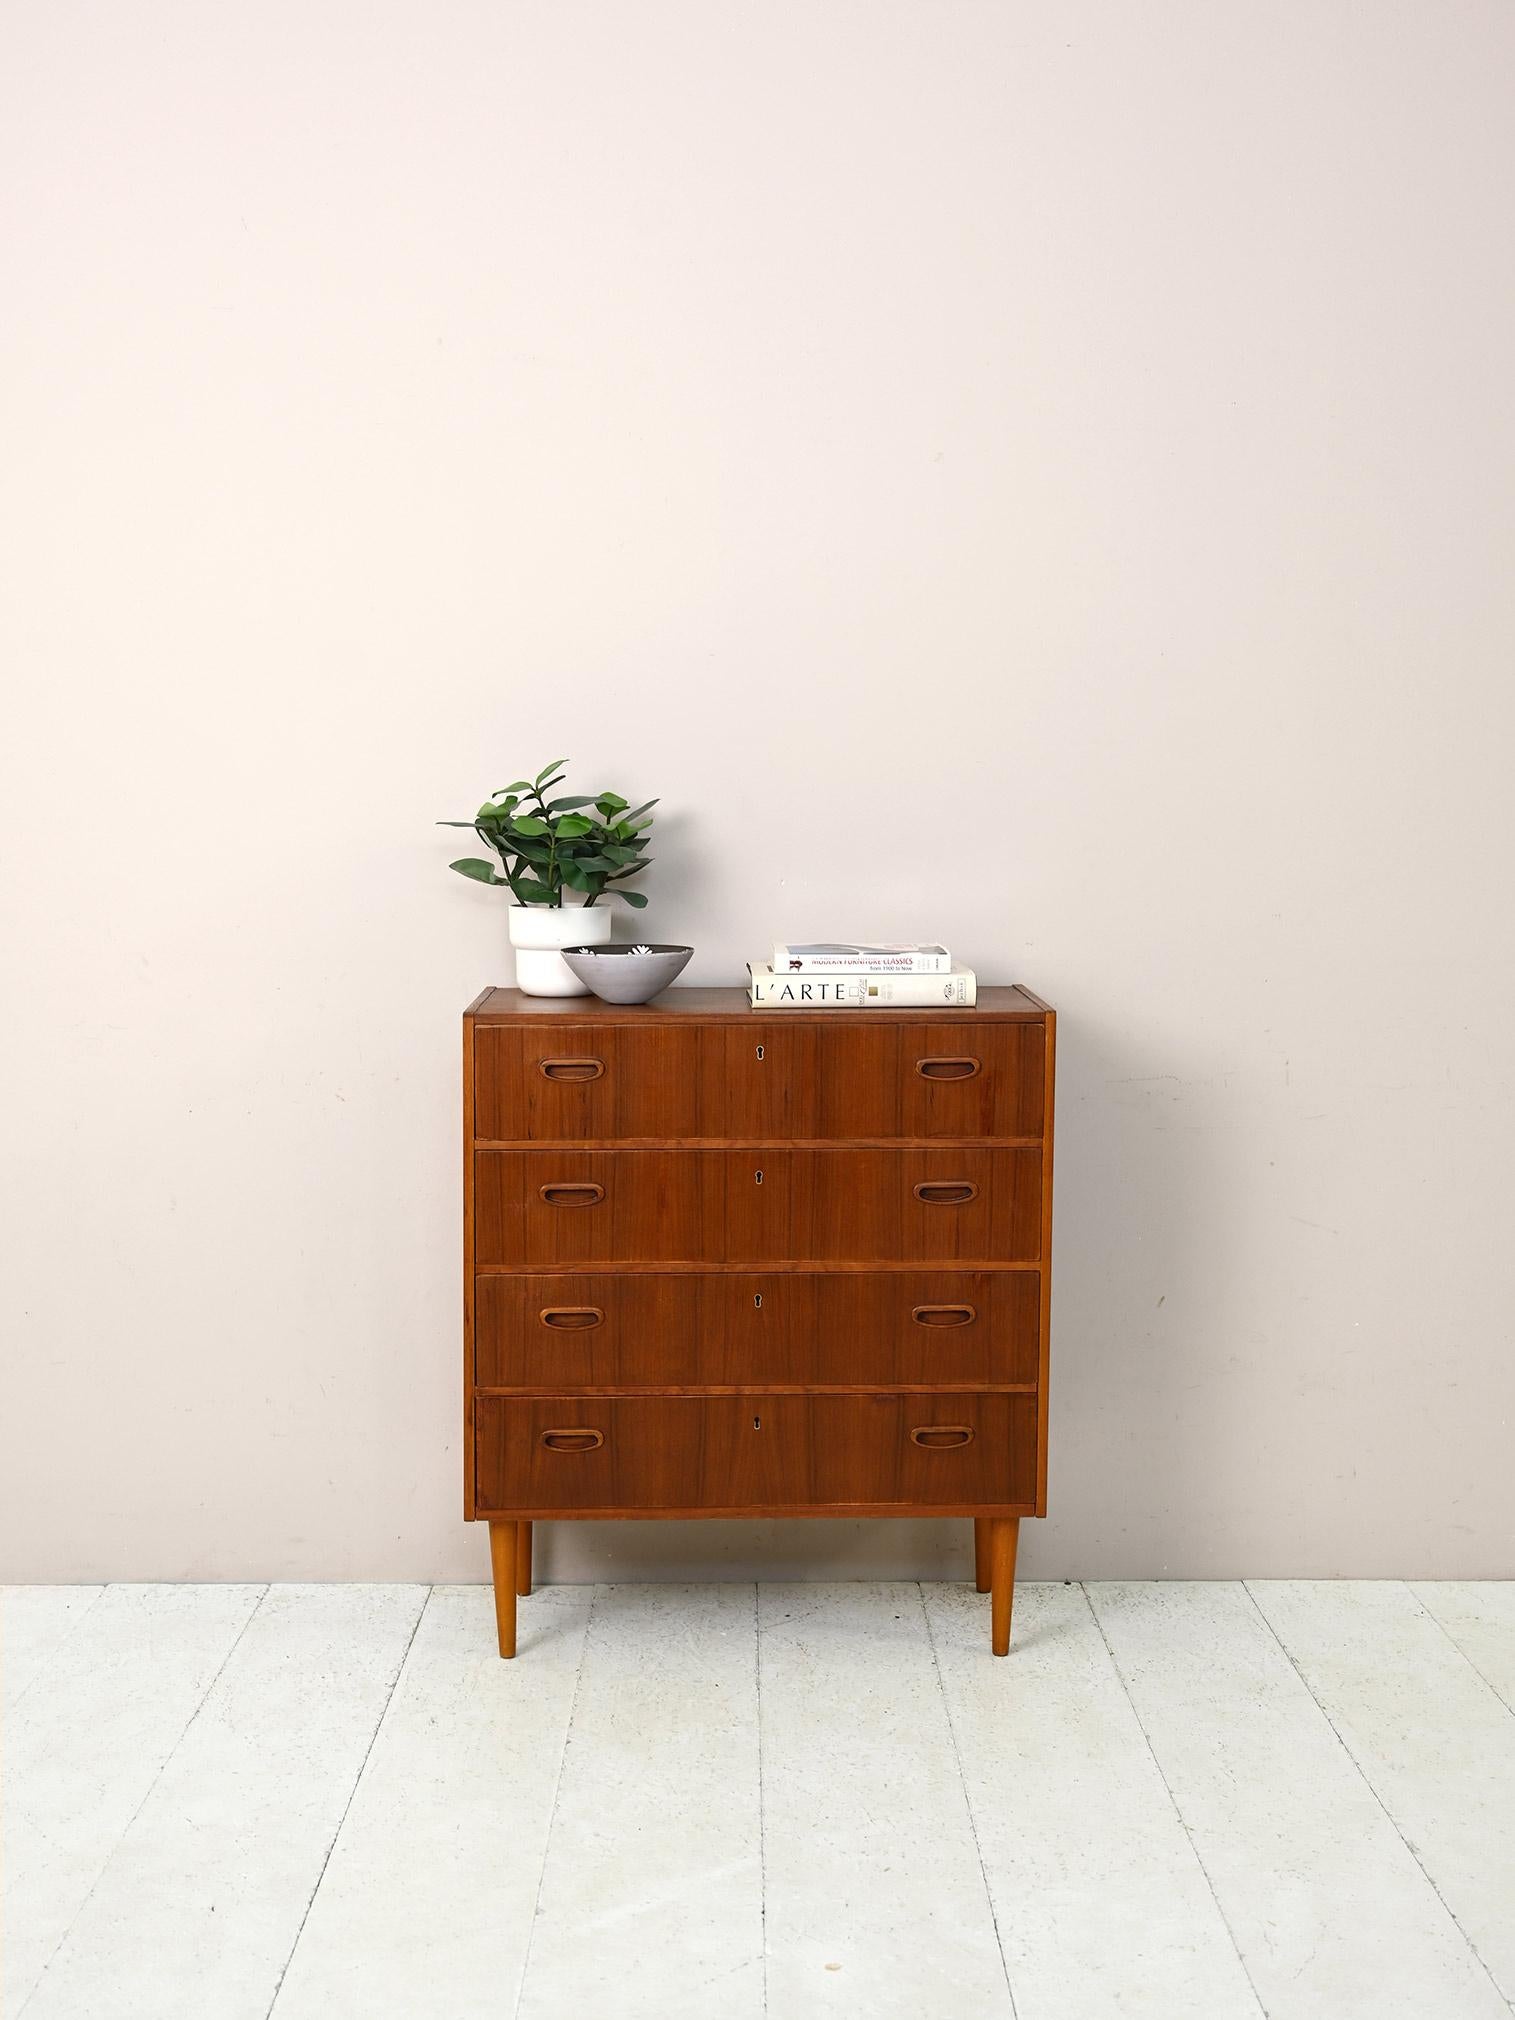 Scandinavian vintage 1960s chest of drawers.

A piece of furniture with clean, essential lines. The squared structure is enhanced by the carved wooden handle of the drawers and the conical legs.
Thanks to the ability to close all the drawers, it can